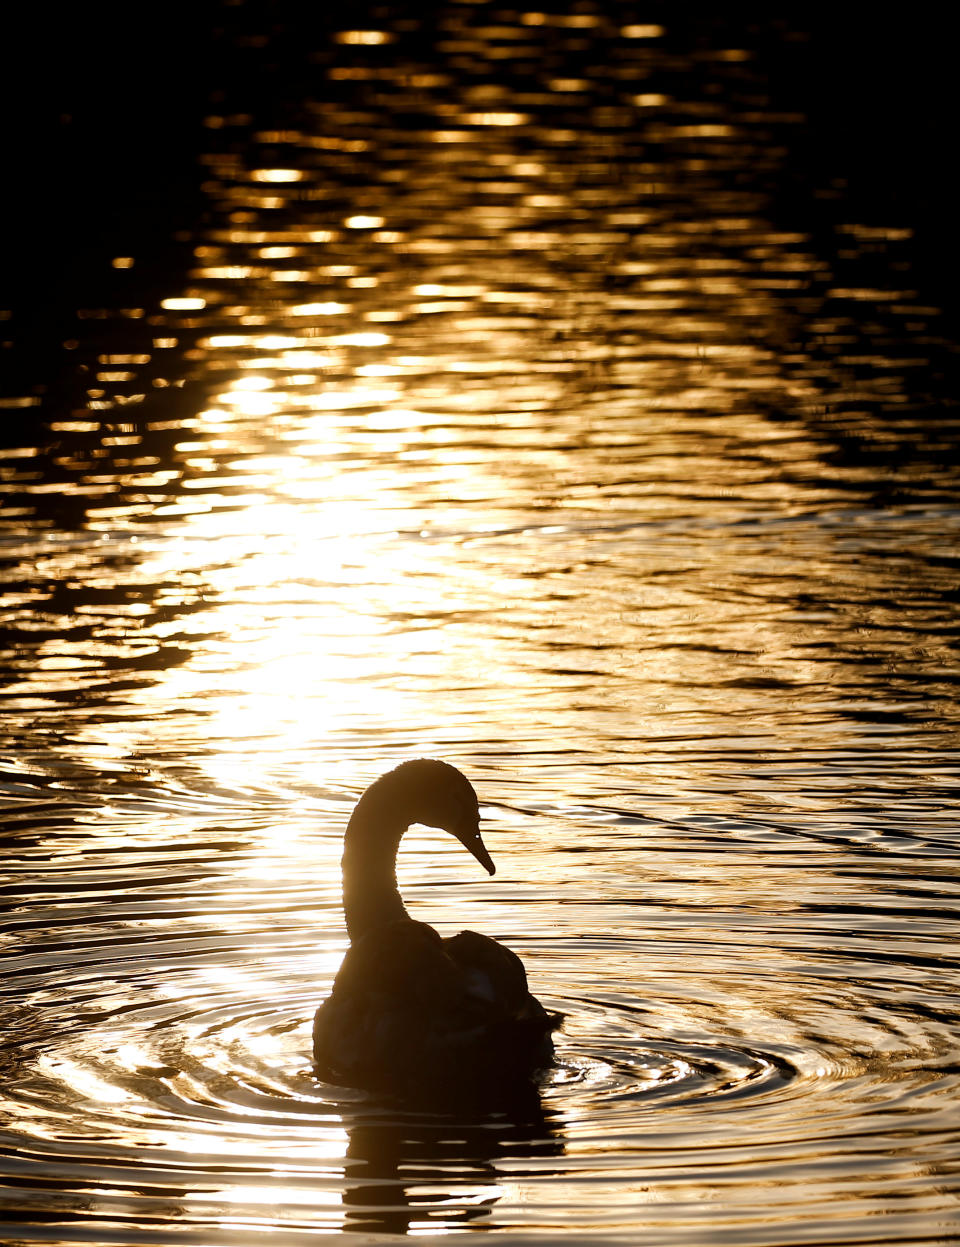 A black swan swims across the lake in St James Park in central London